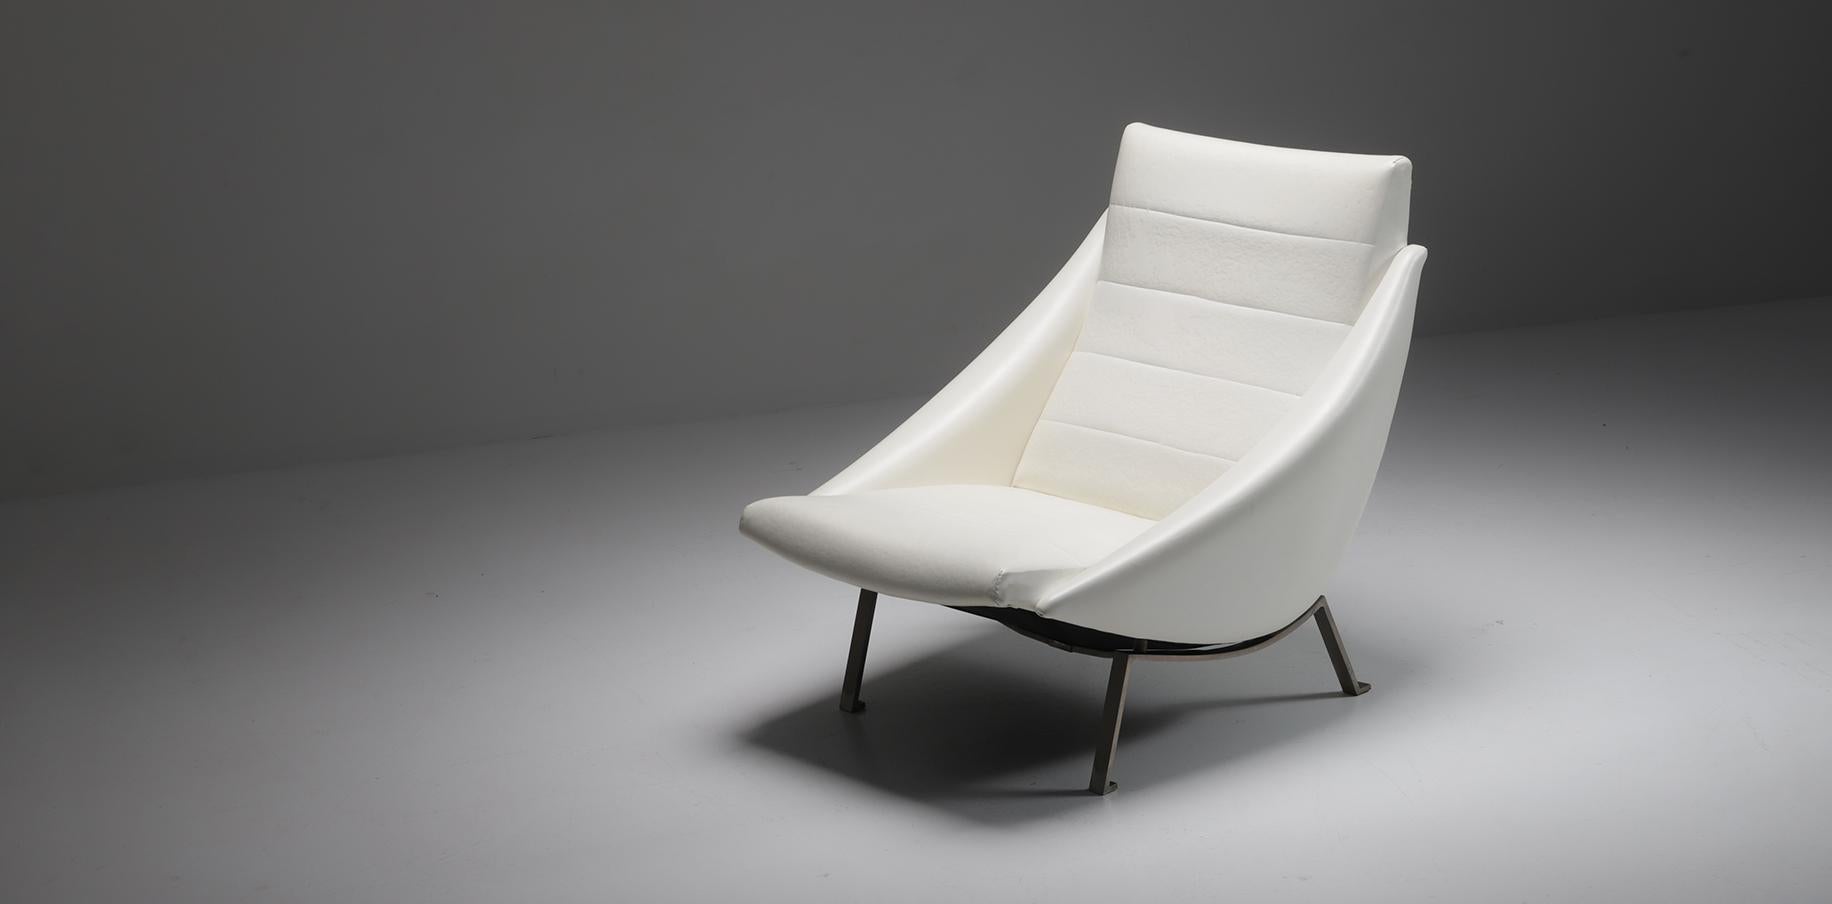 Rare Mid-Century Modernist Lounge Chair in White Original Viny 1950 For Sale 3